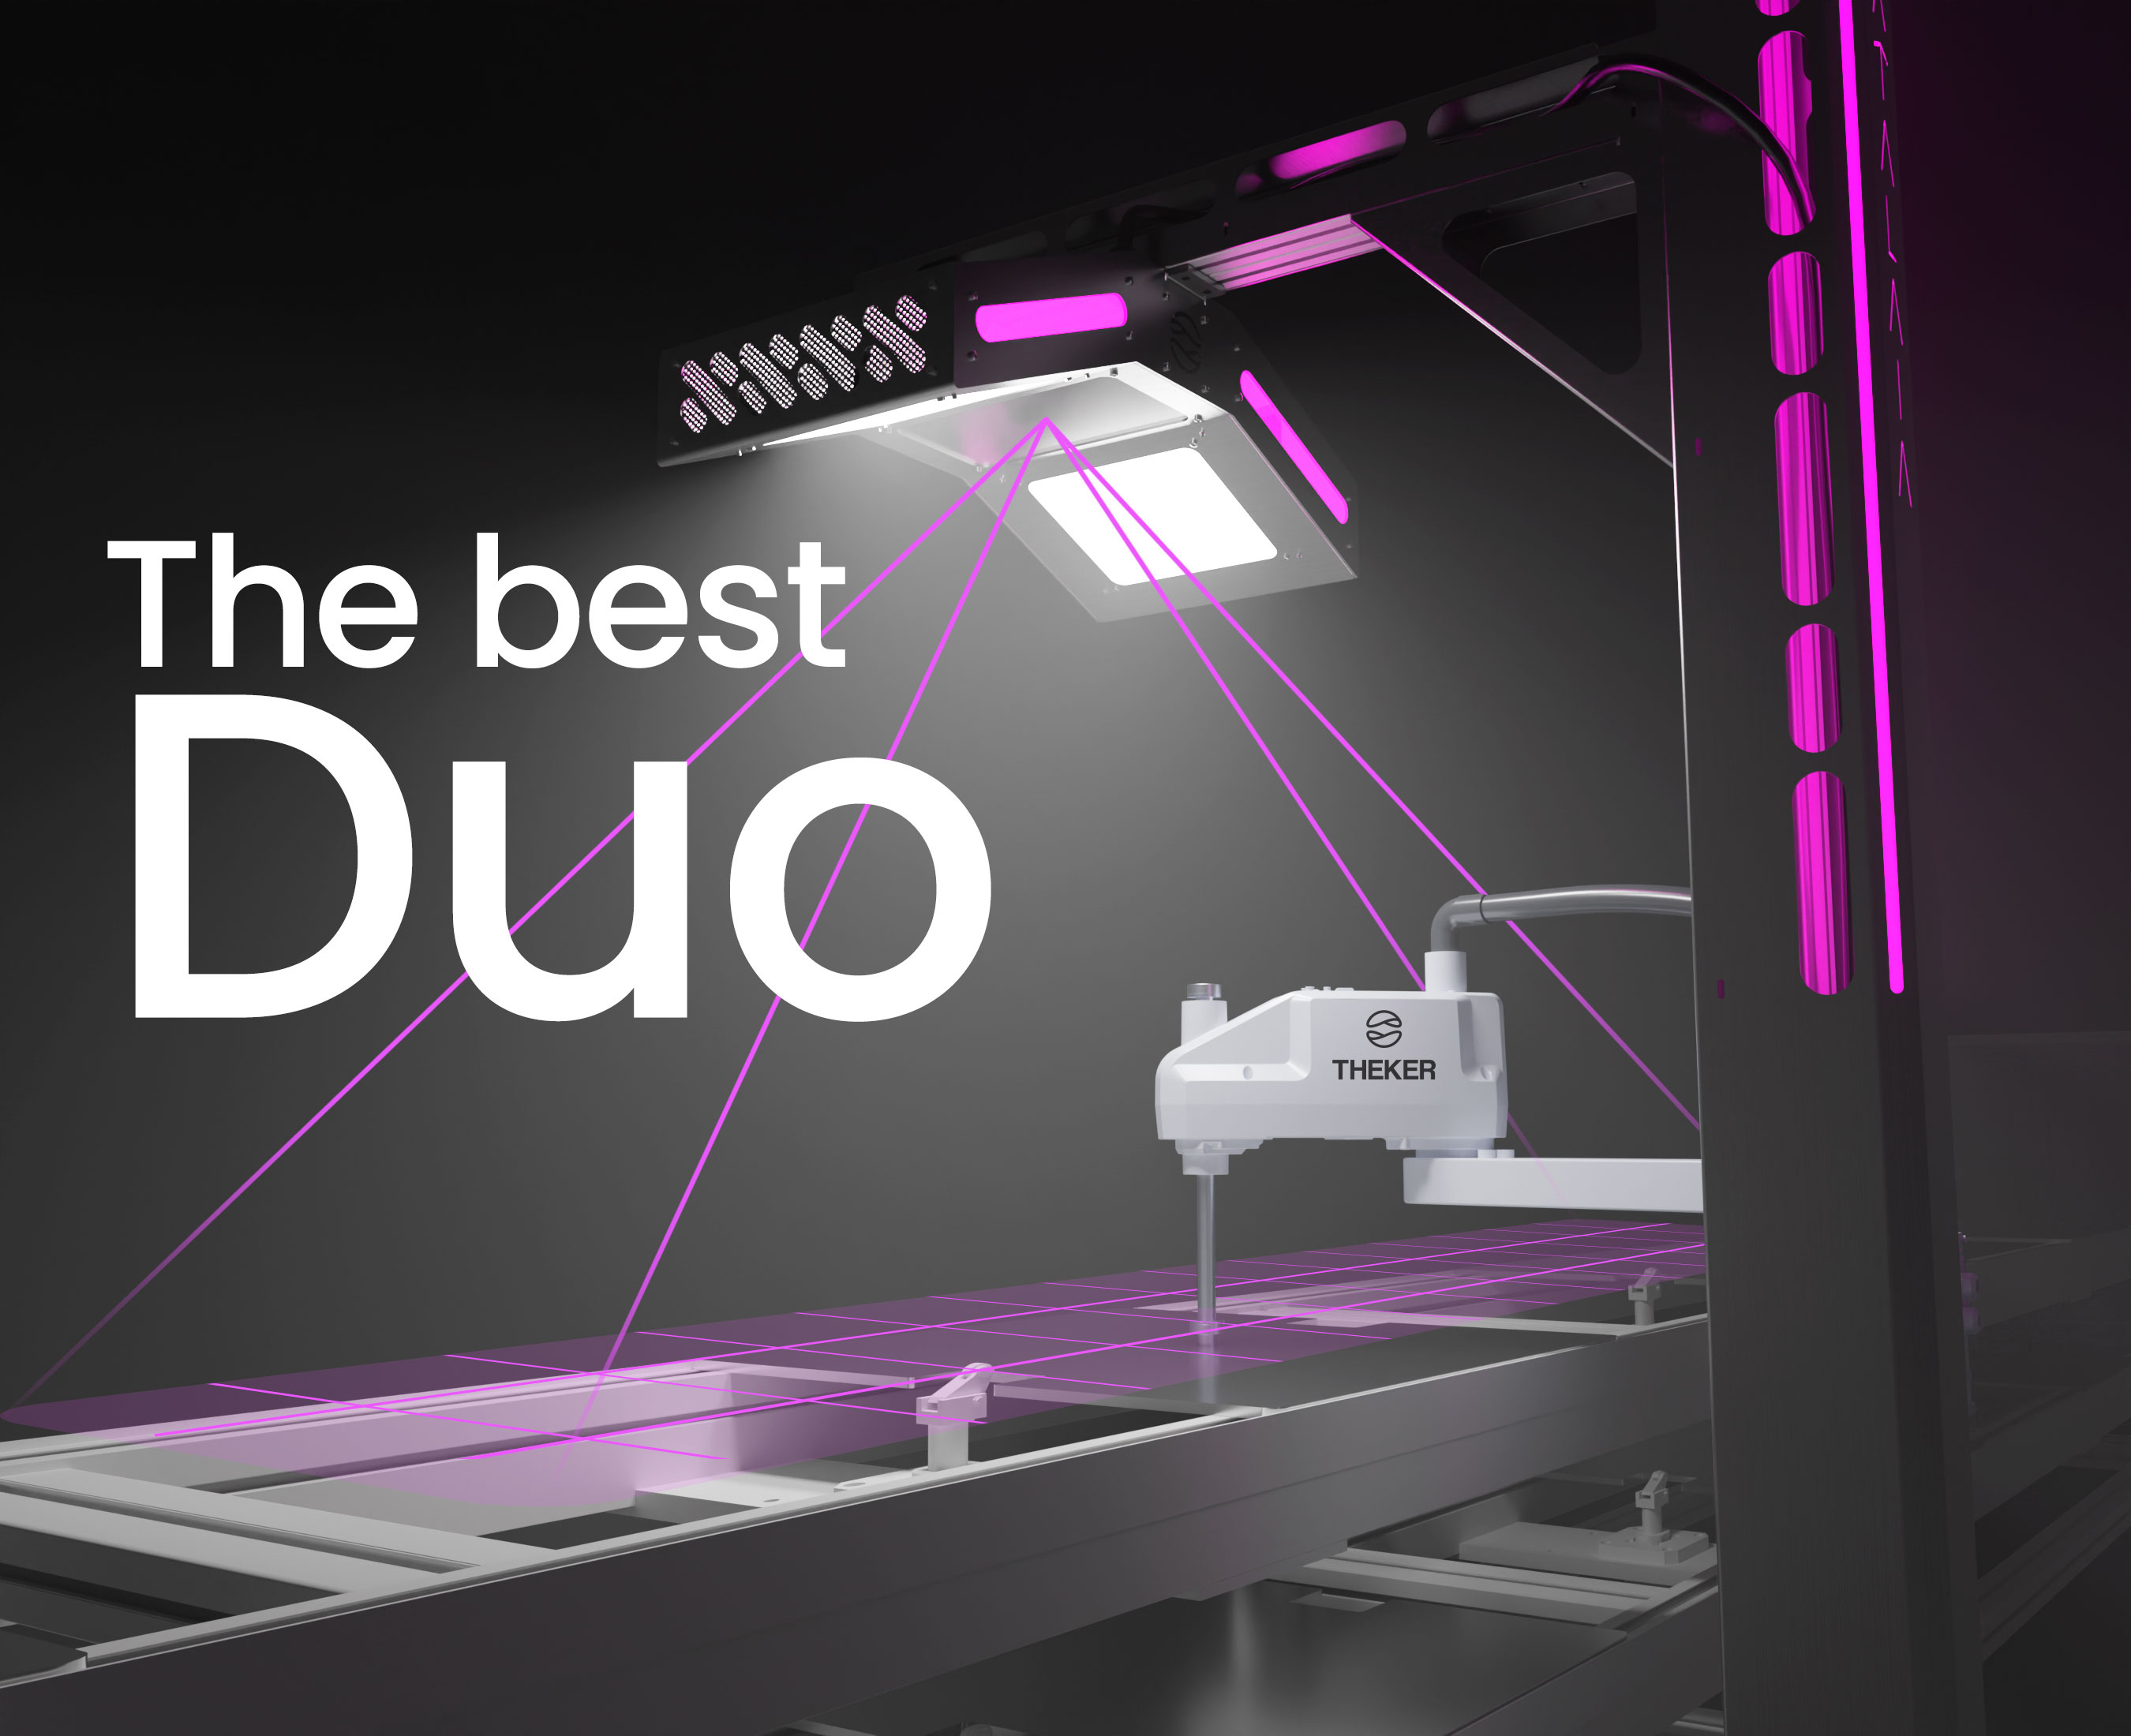 Best Duo THEKER Robot Atalaia deep learning 